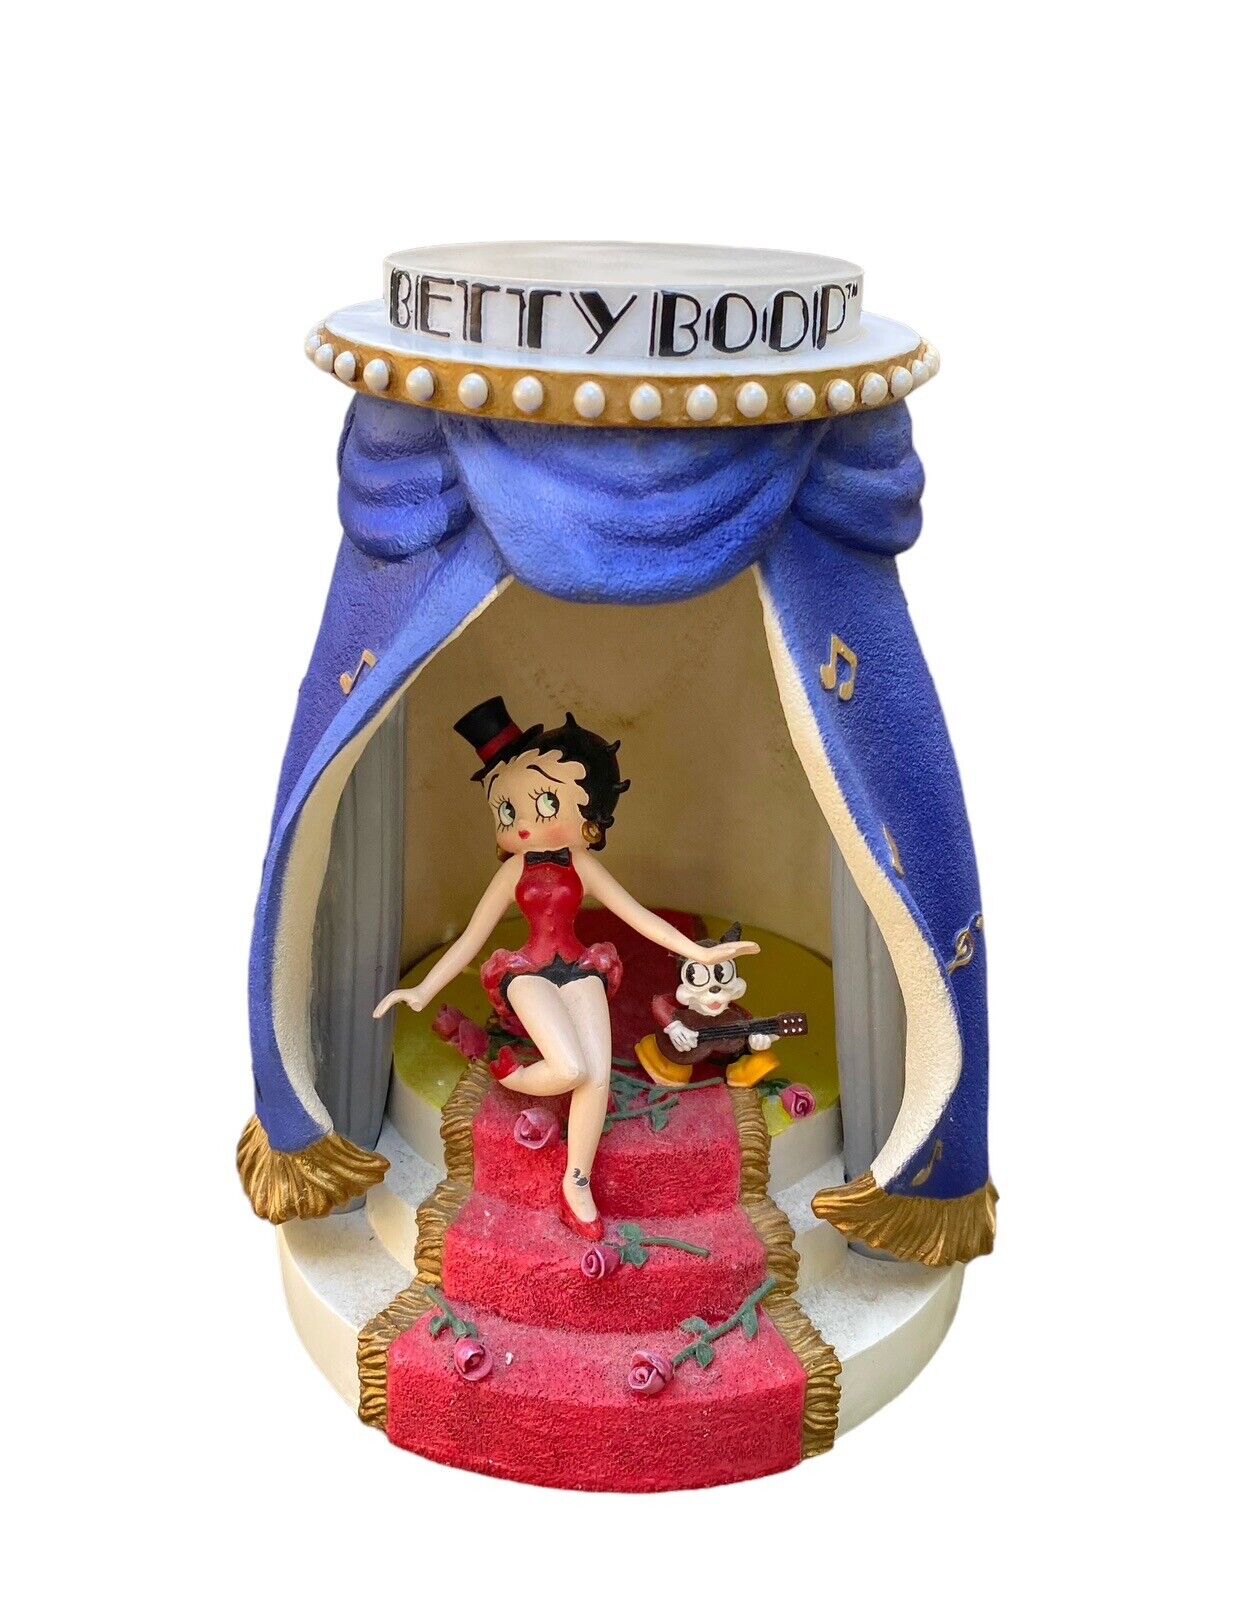 VTG BETTY BOOP Bimbo On Stage MusicBox Figure Curtain Westland Giftware 2001 Y2K